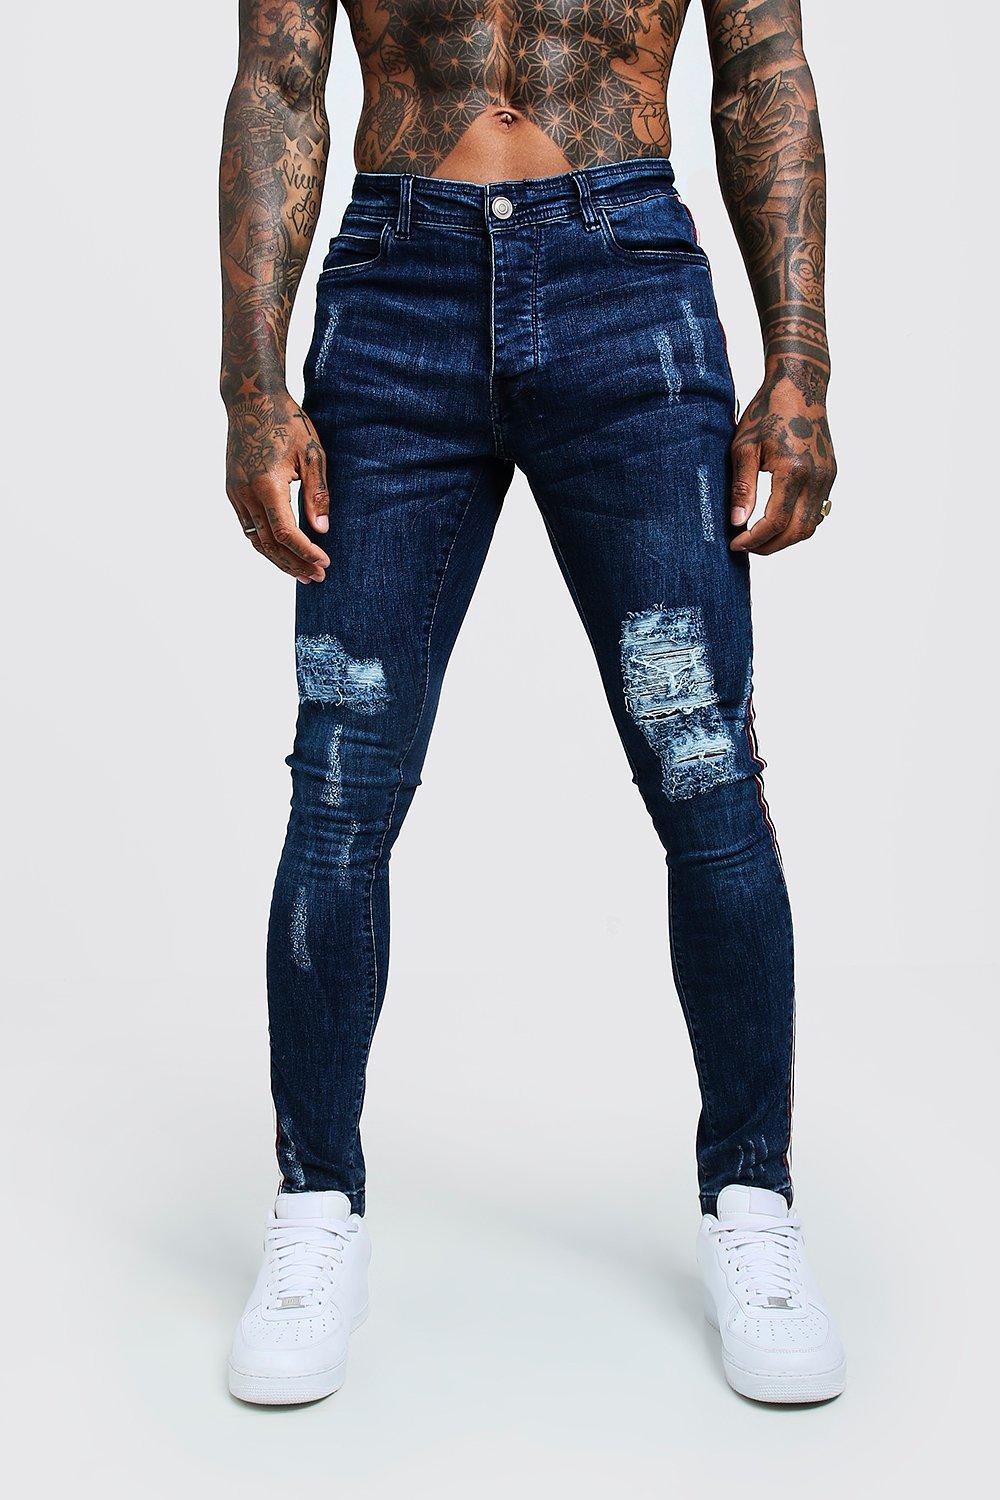 BoohooMAN Super Skinny Distressed Jeans With Side Tape in Blue for Men ...